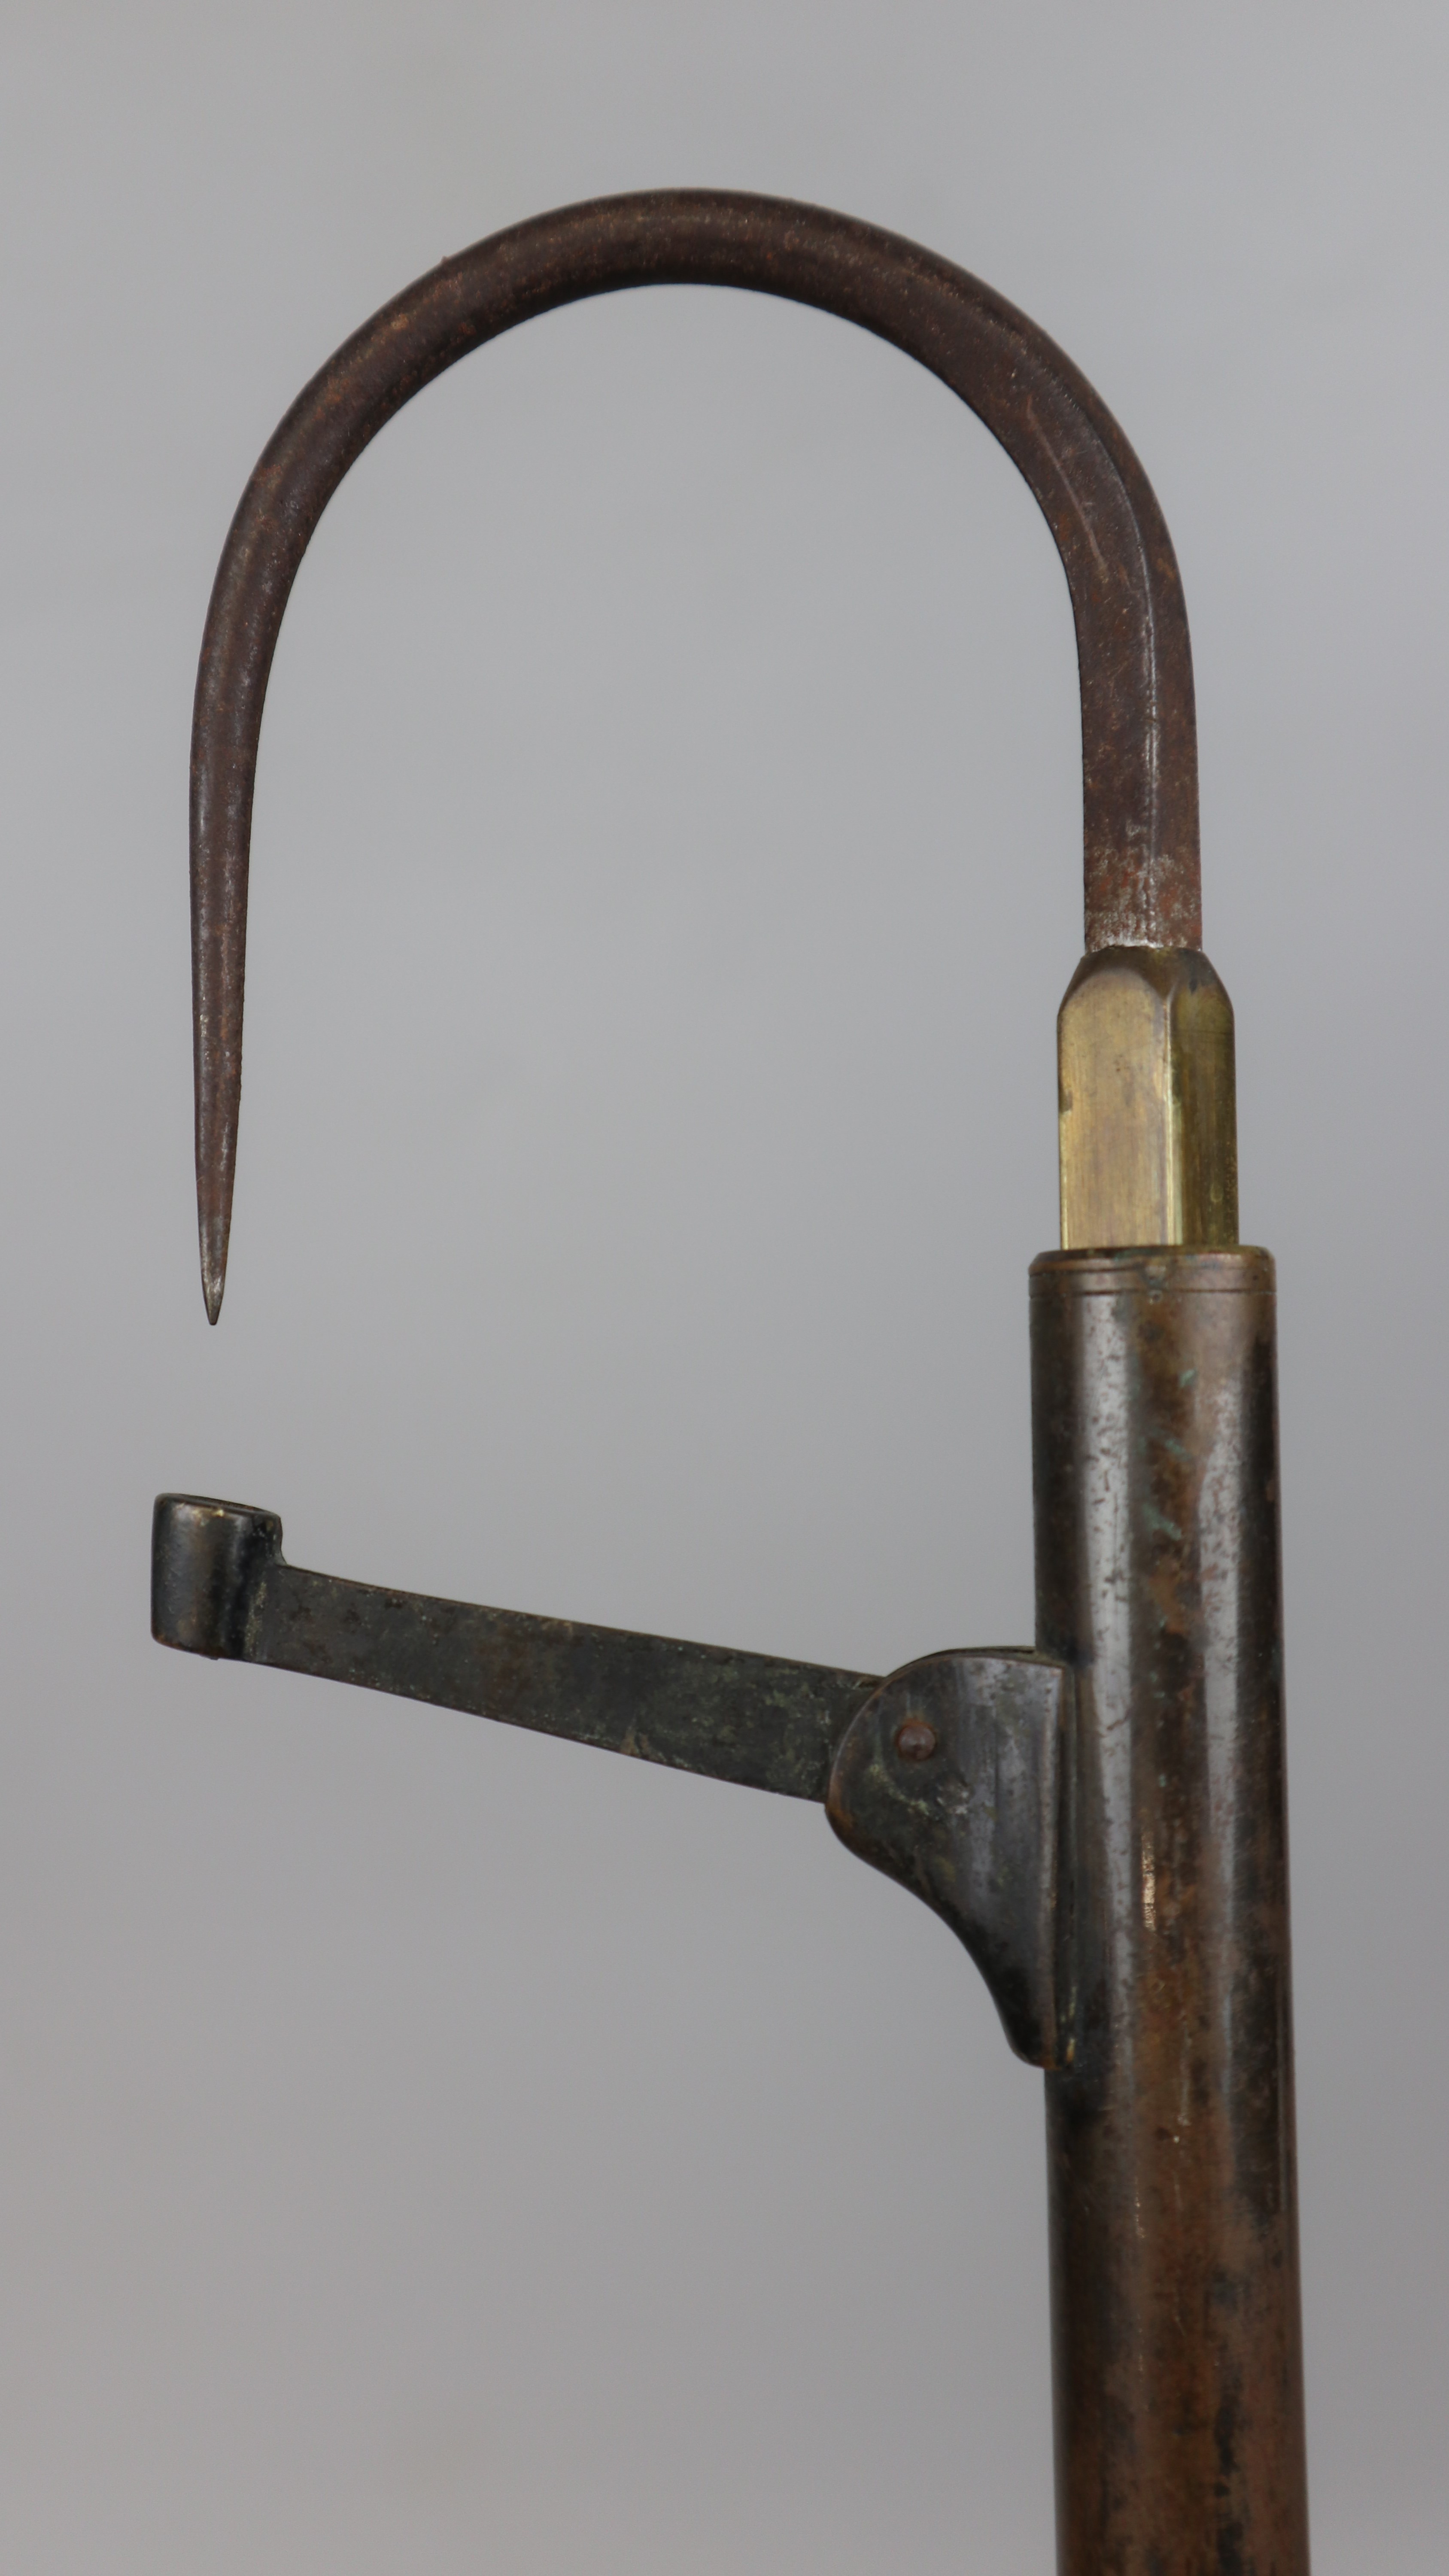 Antique telescopic fishing gaff - Image 3 of 6